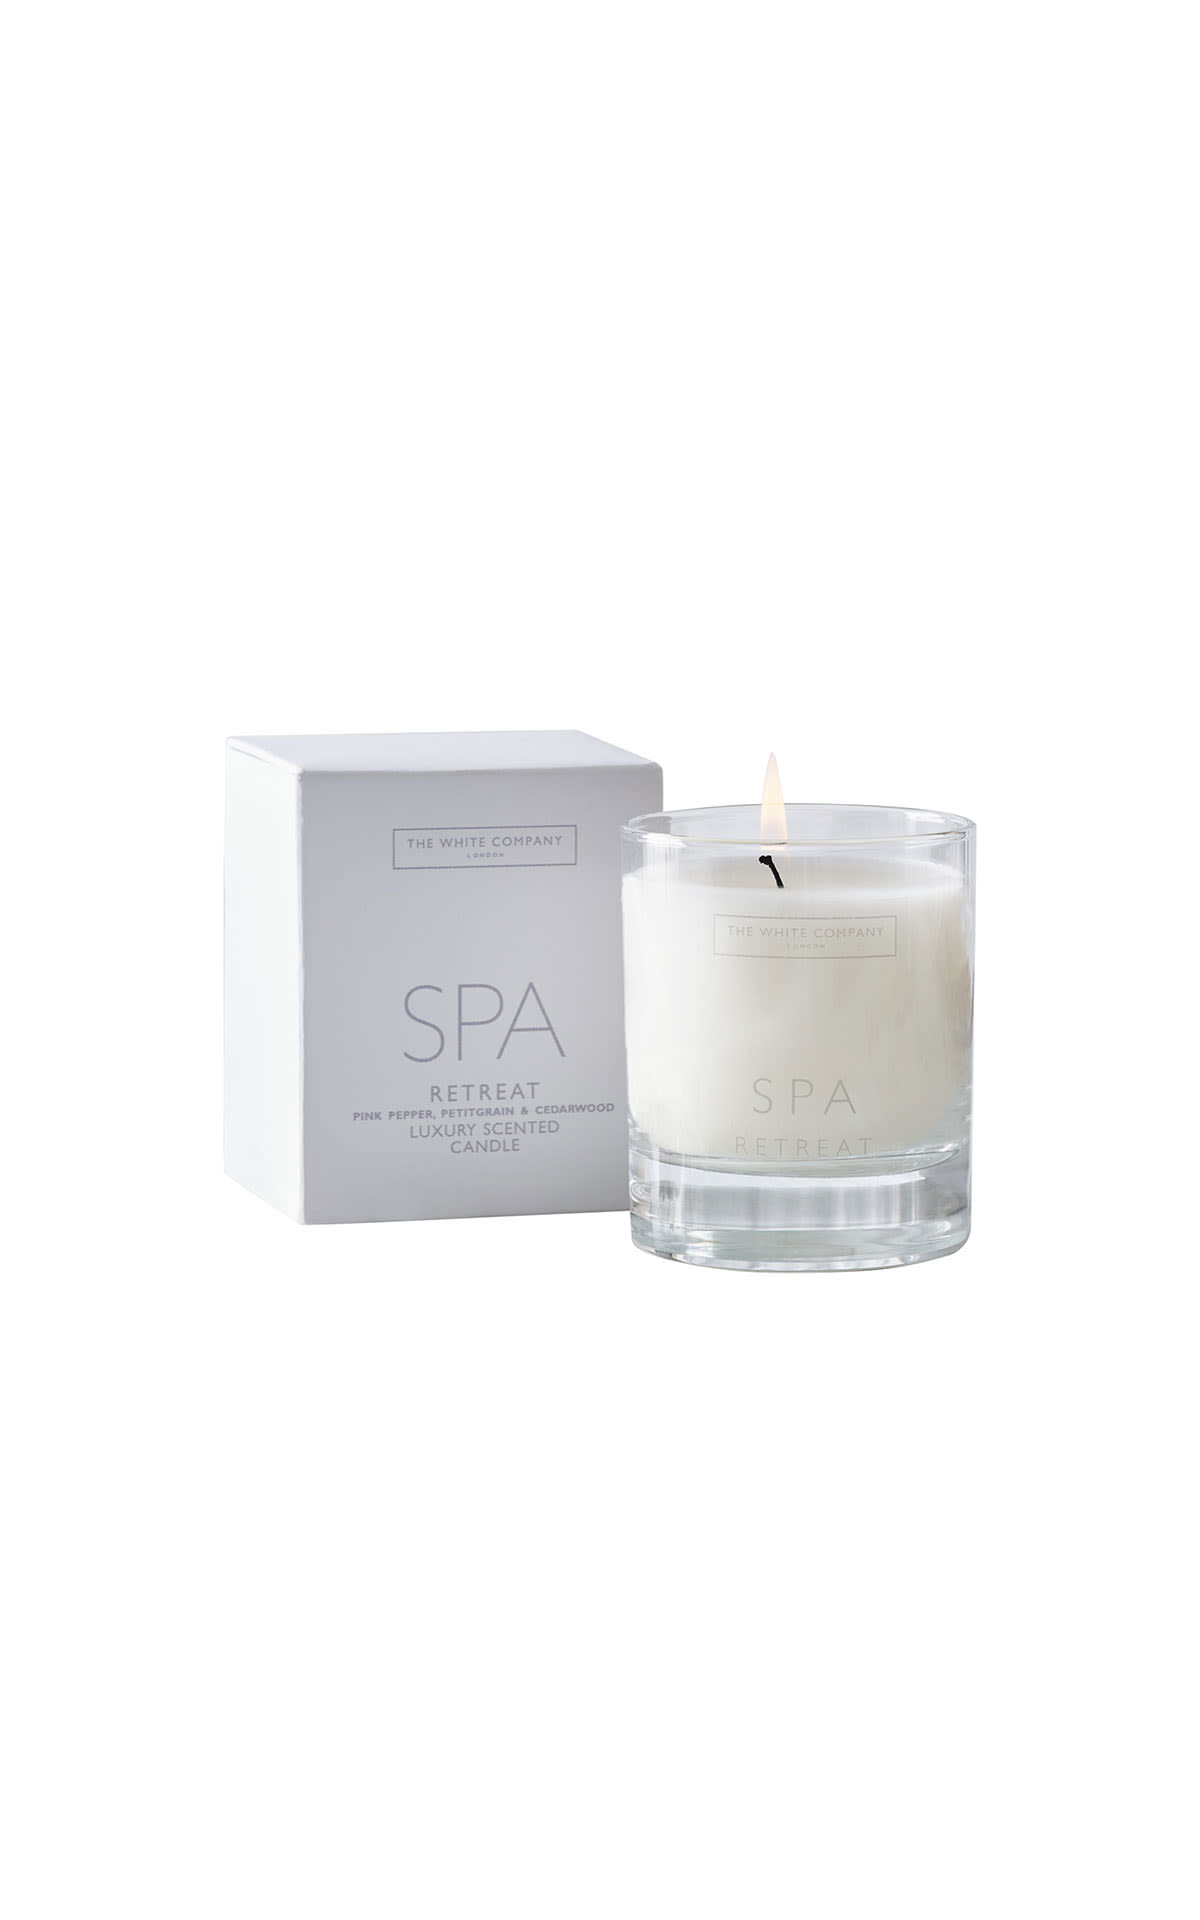 The White Company Spa retreat candle from Bicester Village